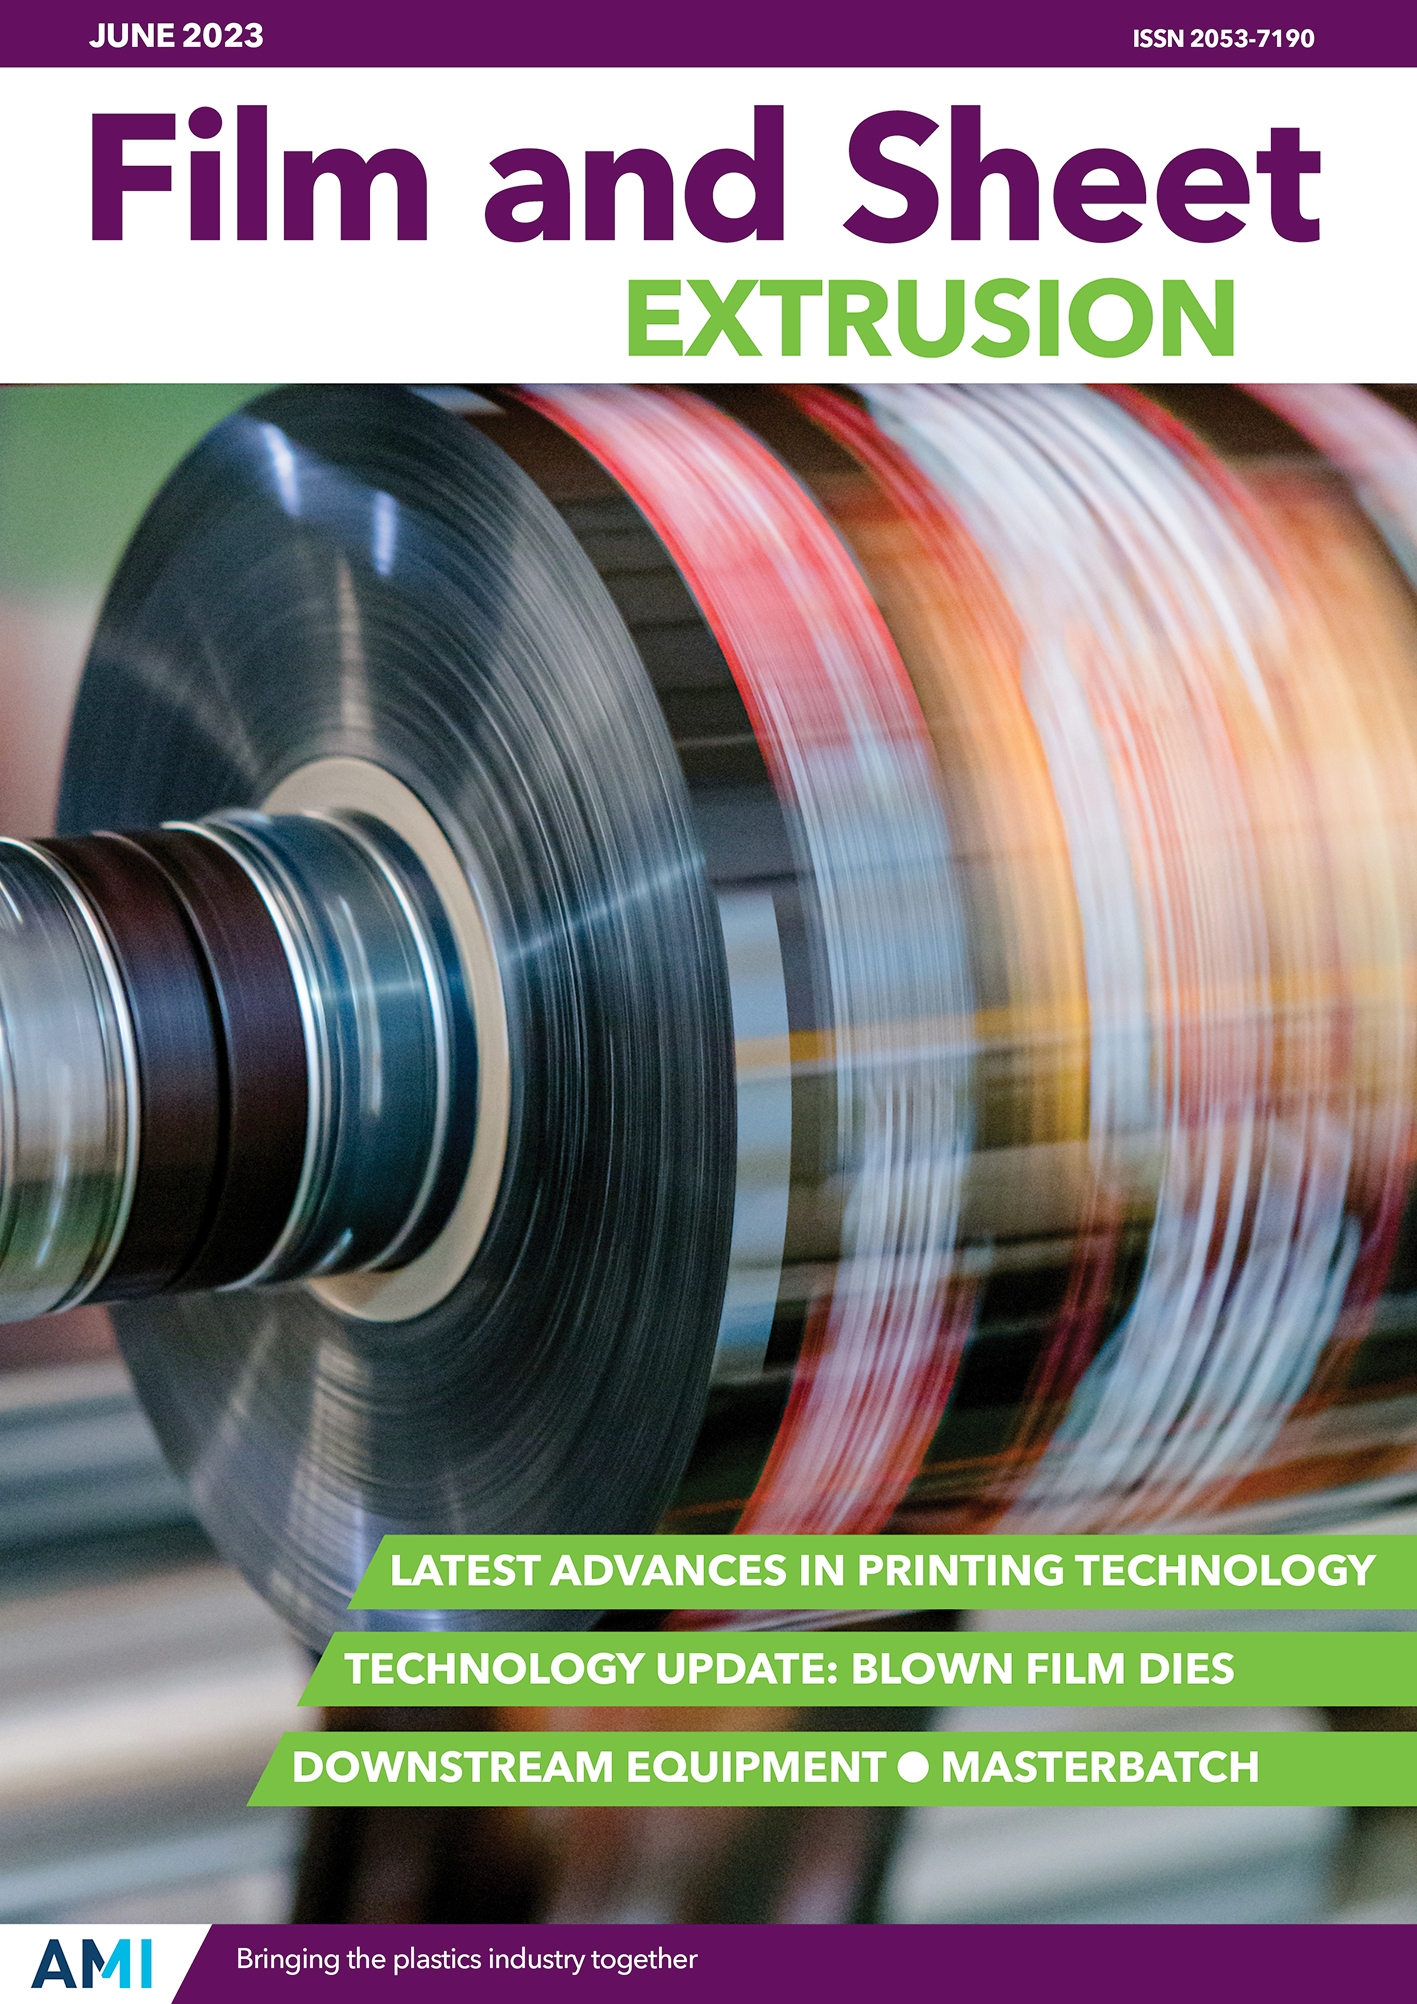 Film and Sheet Extrusion June 2023